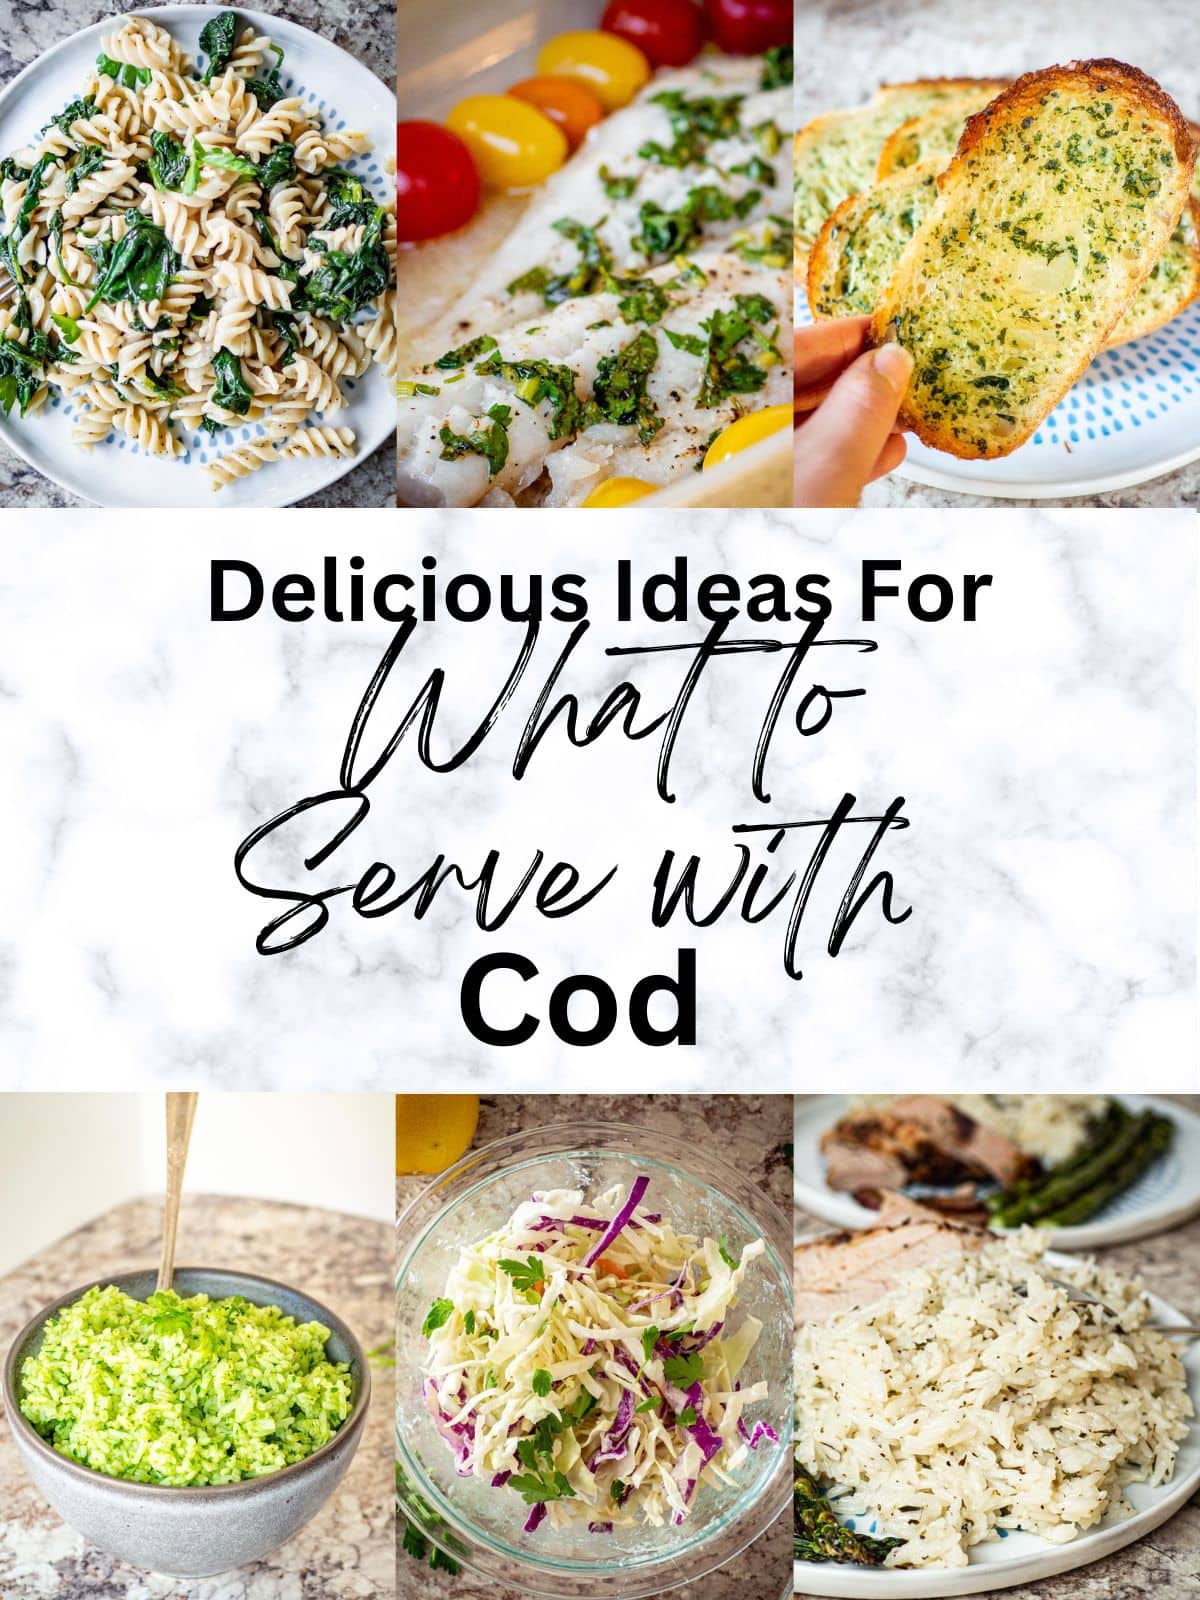 Collage of side dishes that pair with cod.